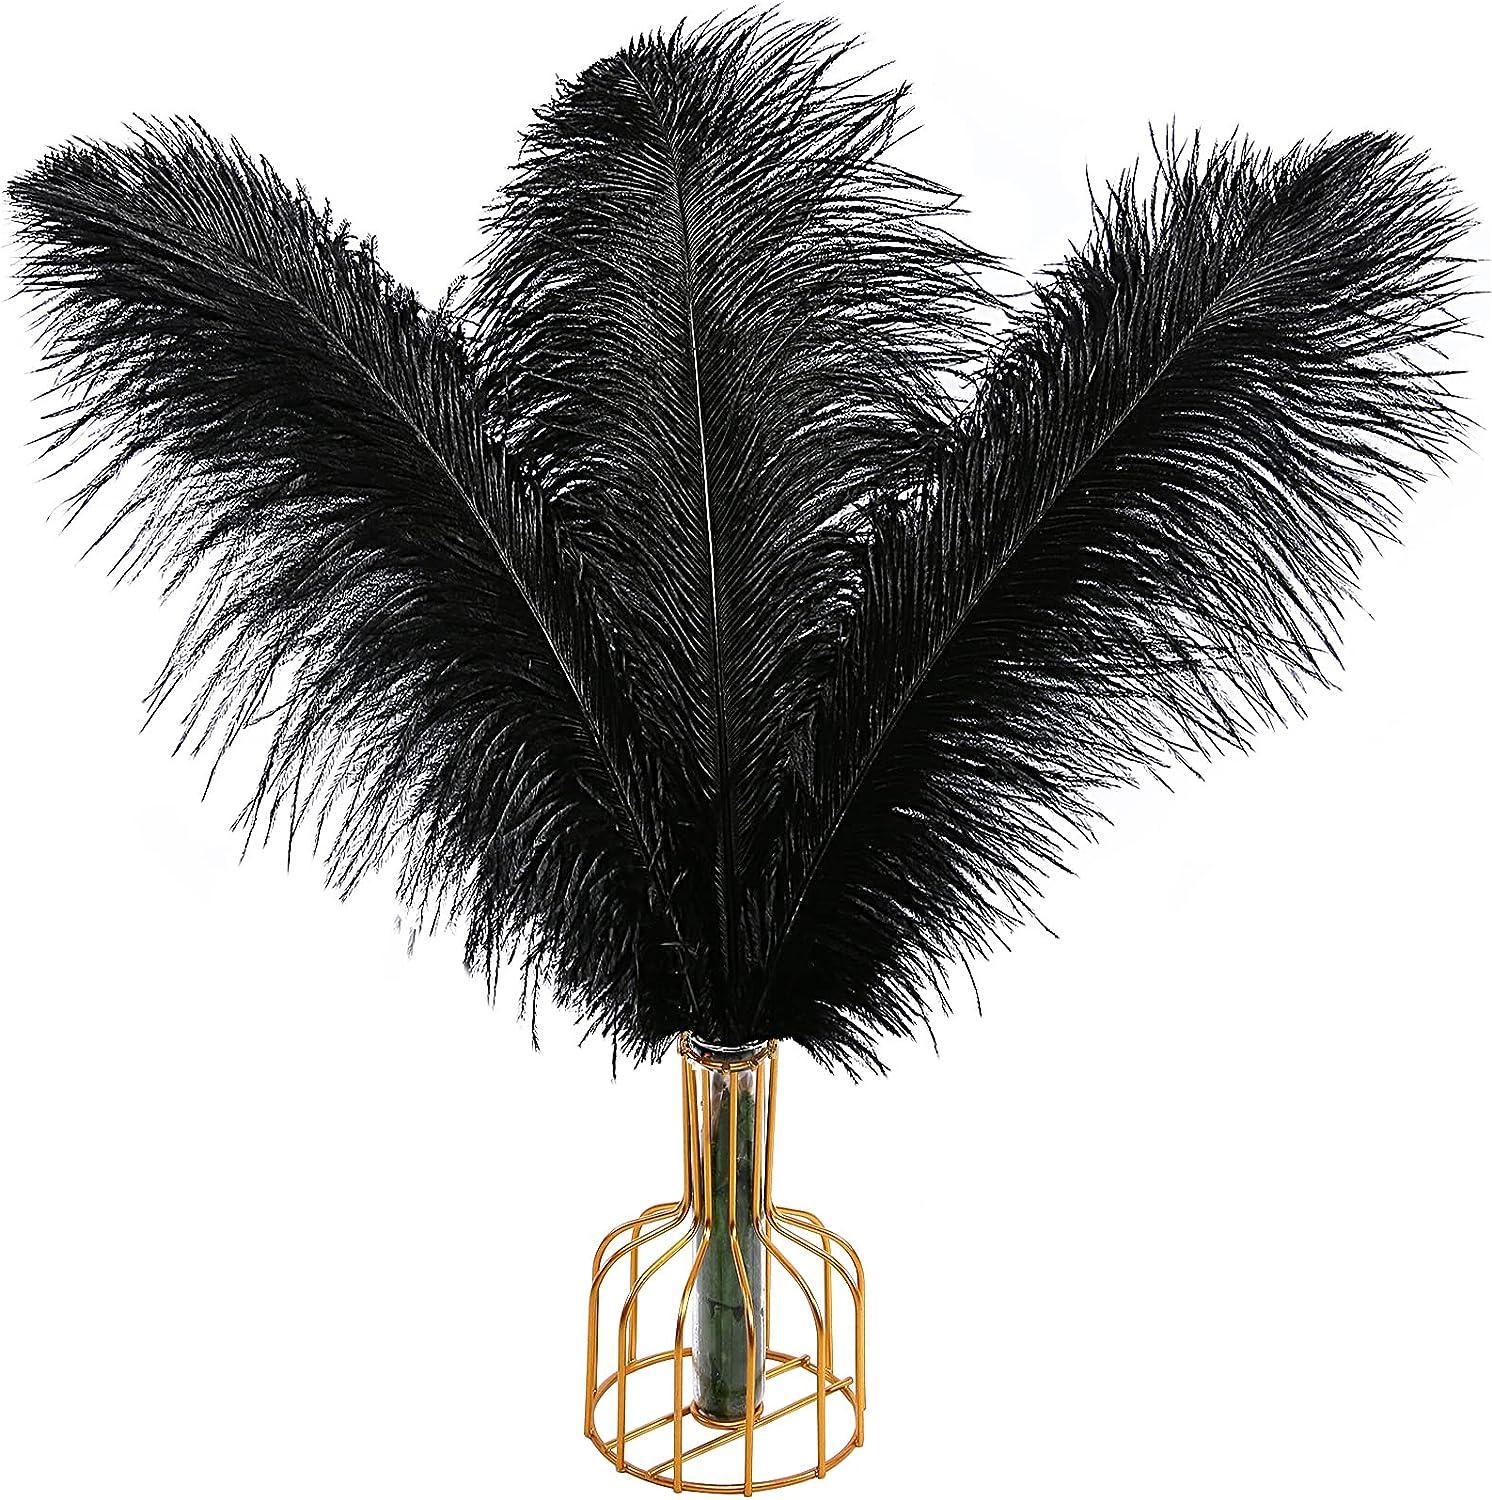 Black ostrich feathers in a gold vase symbolize the meaningful discovery of feathers.